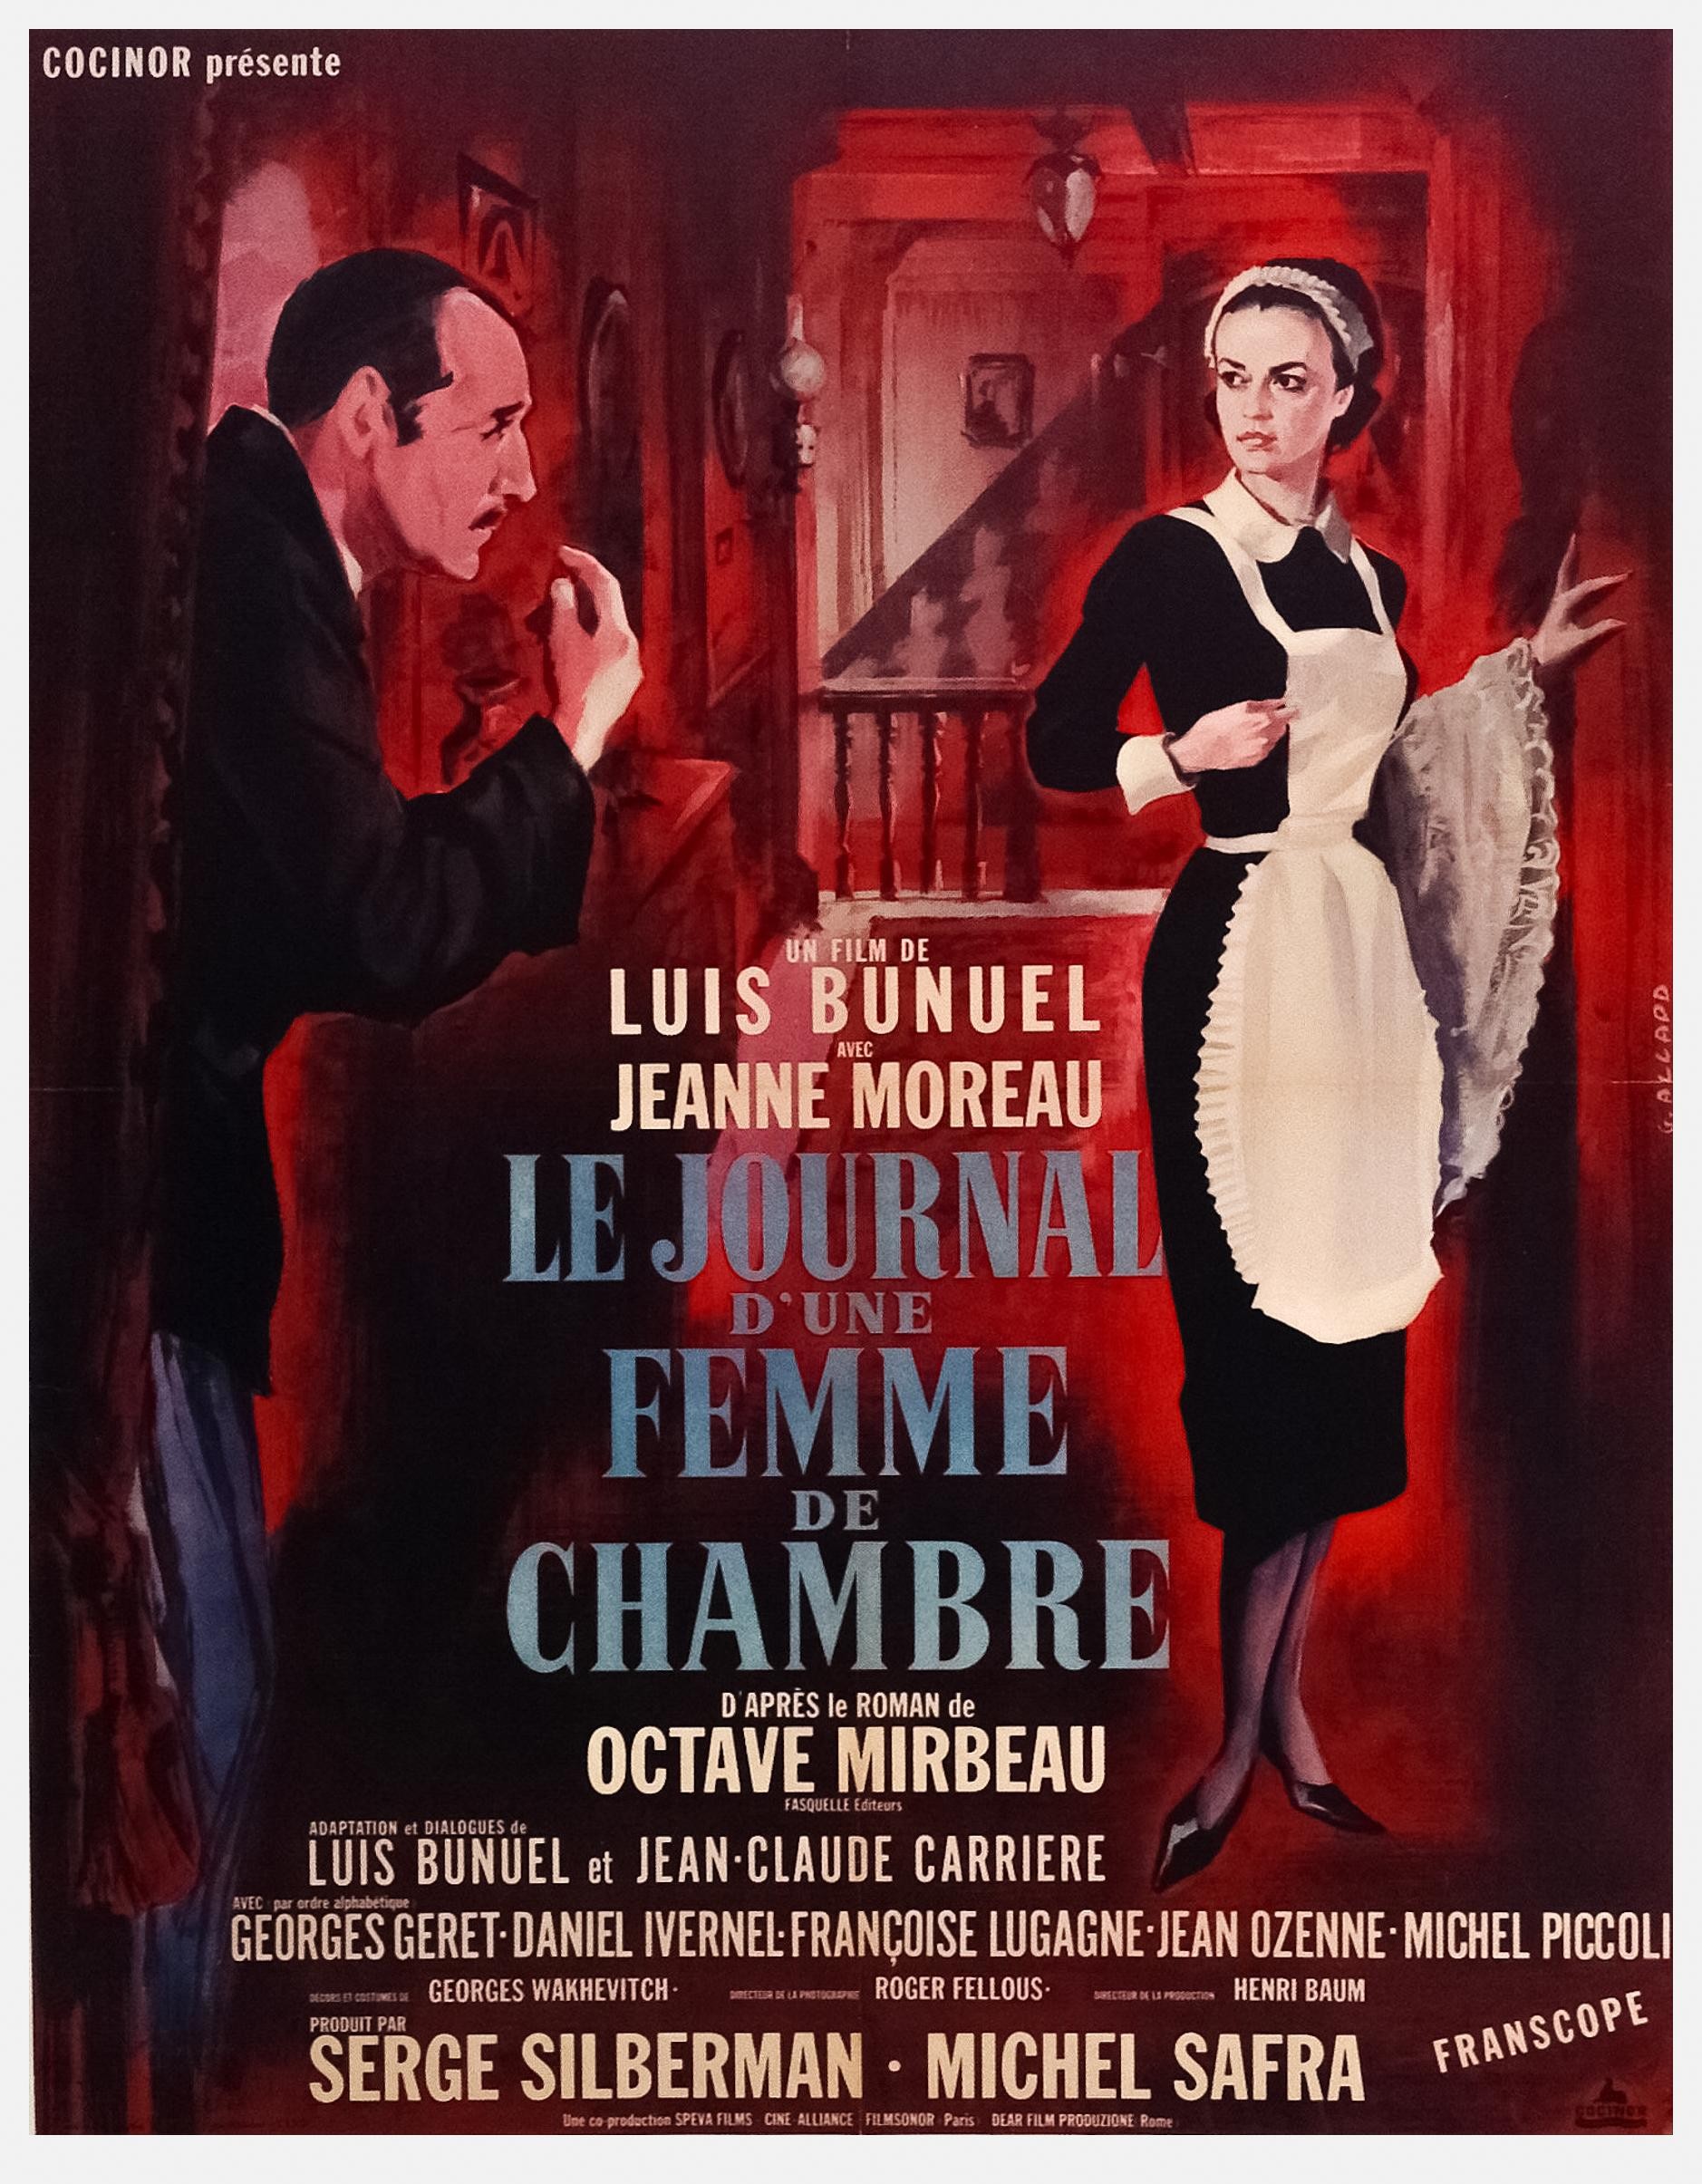 THE DIARY OF A CHAMBERMAID [Le journal d'une femme de chambre]